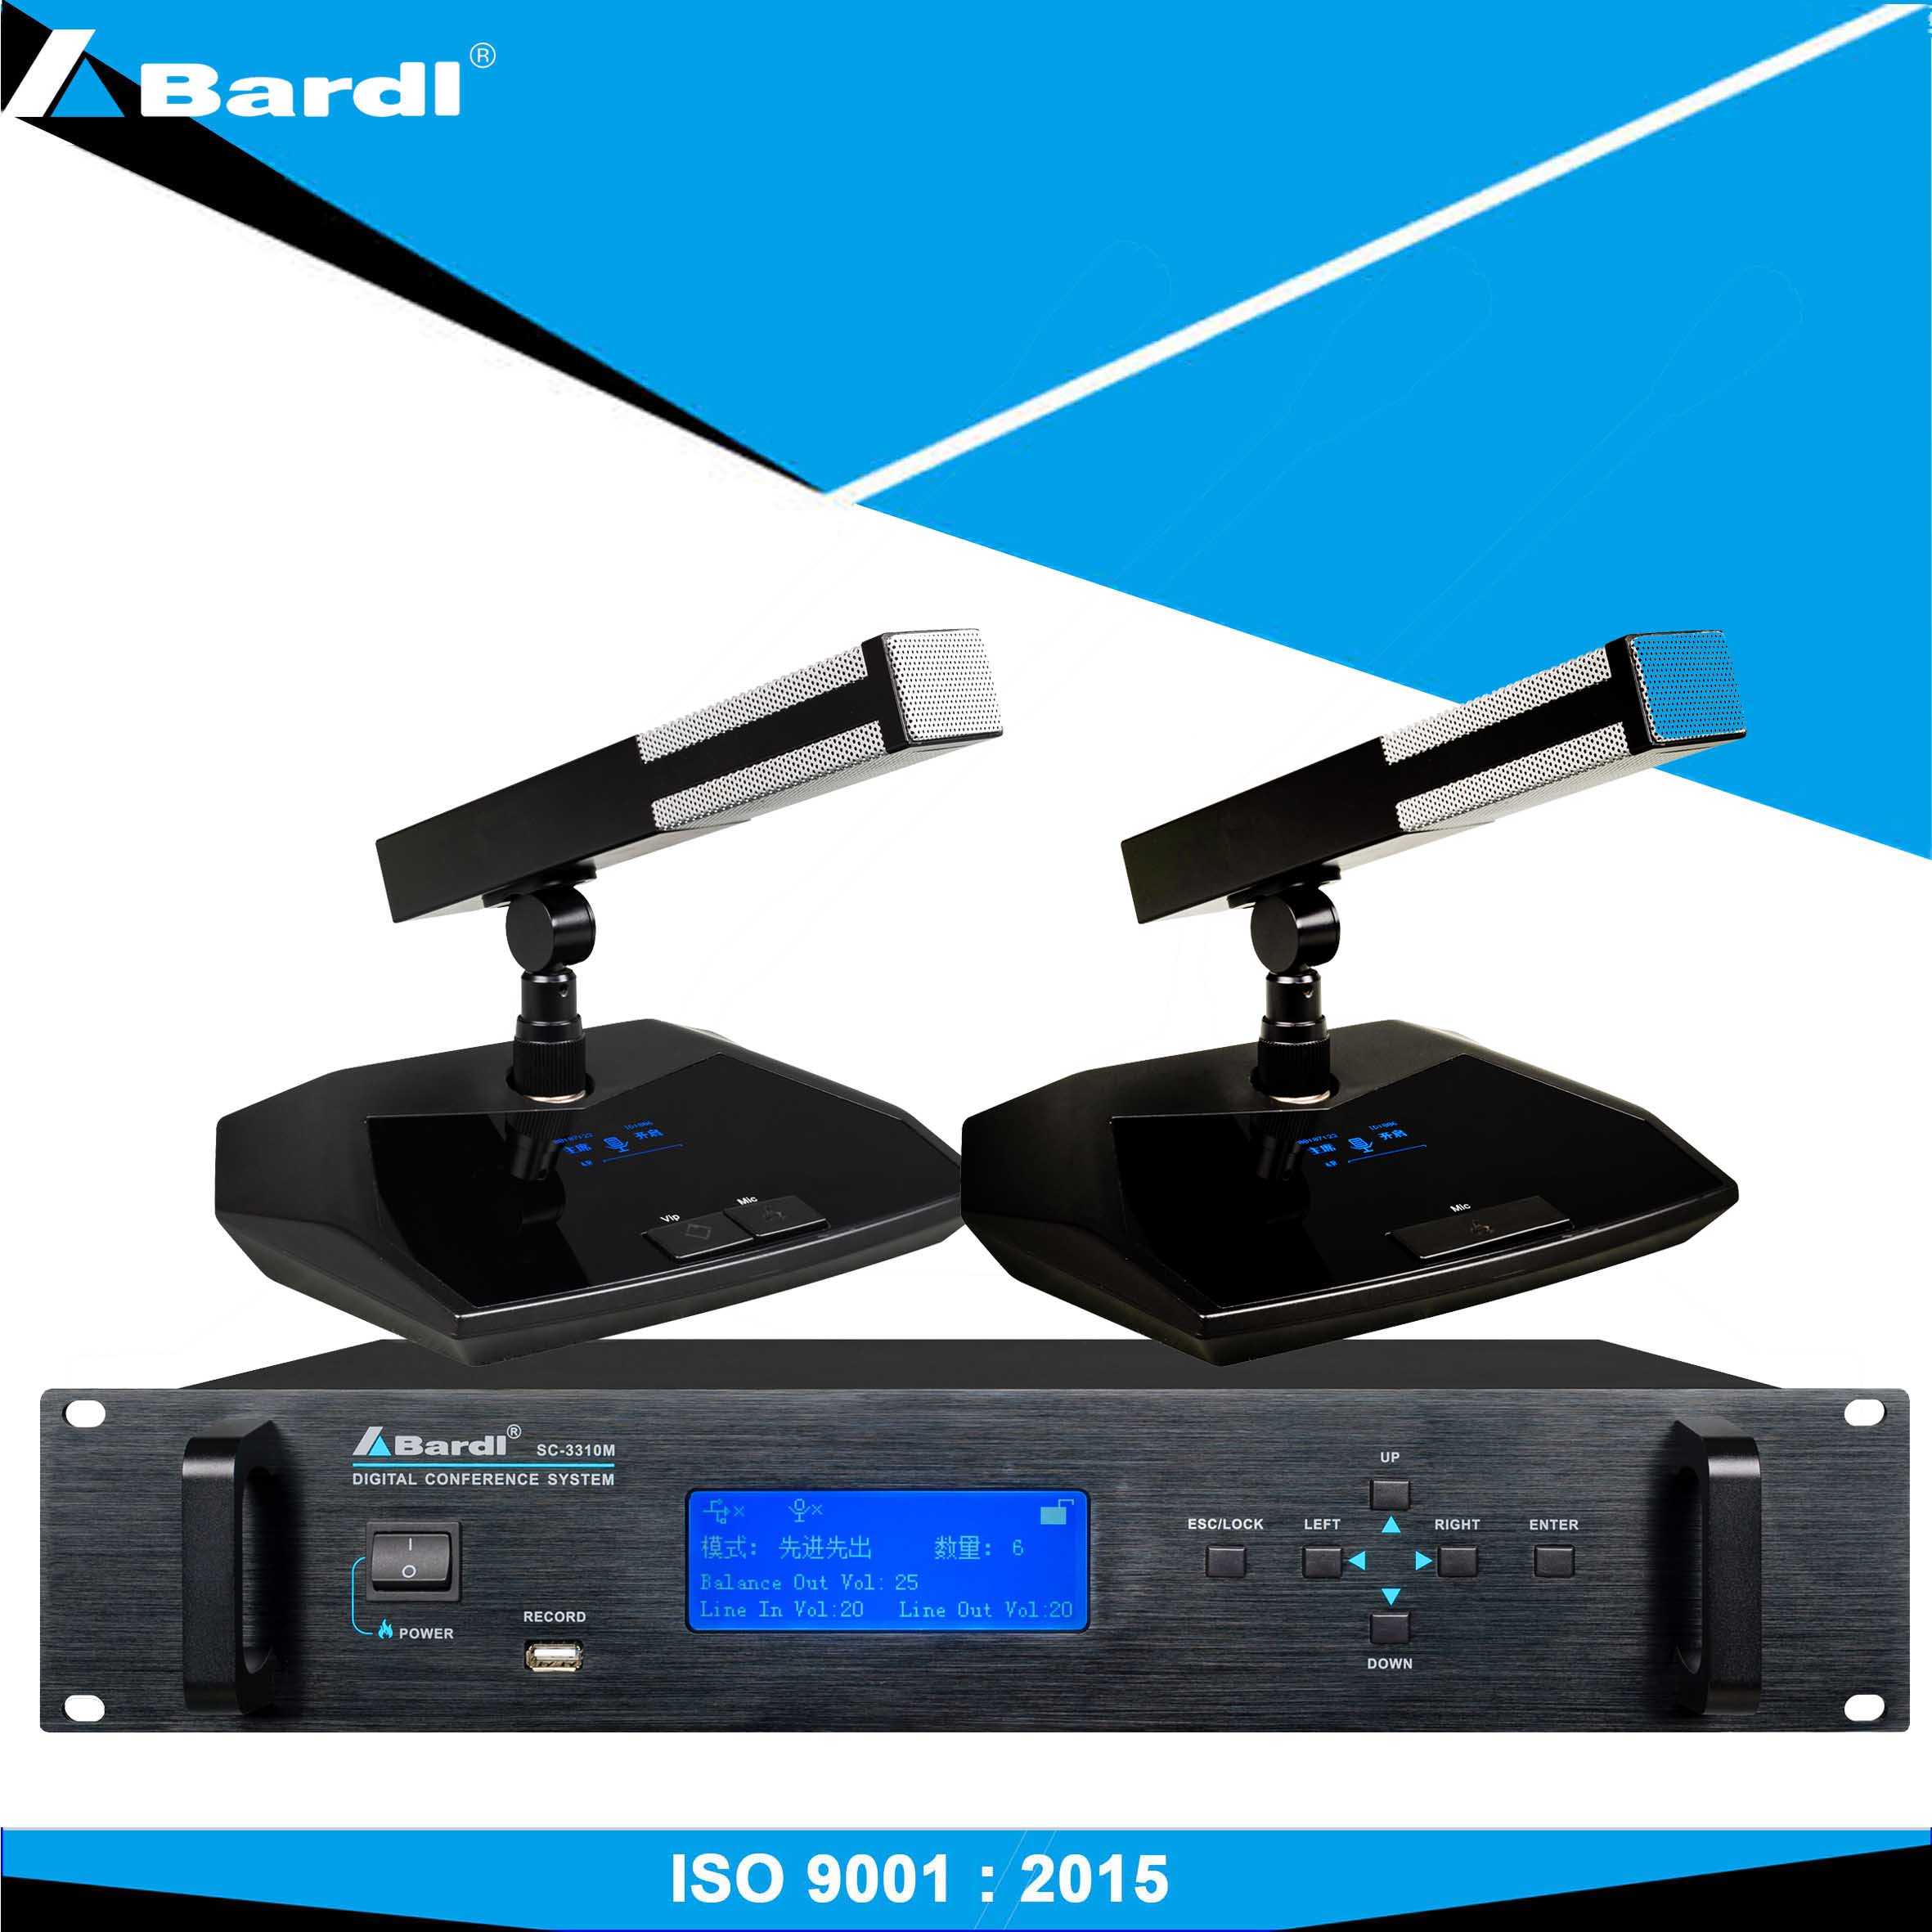 Bardl Conference System SC-3310